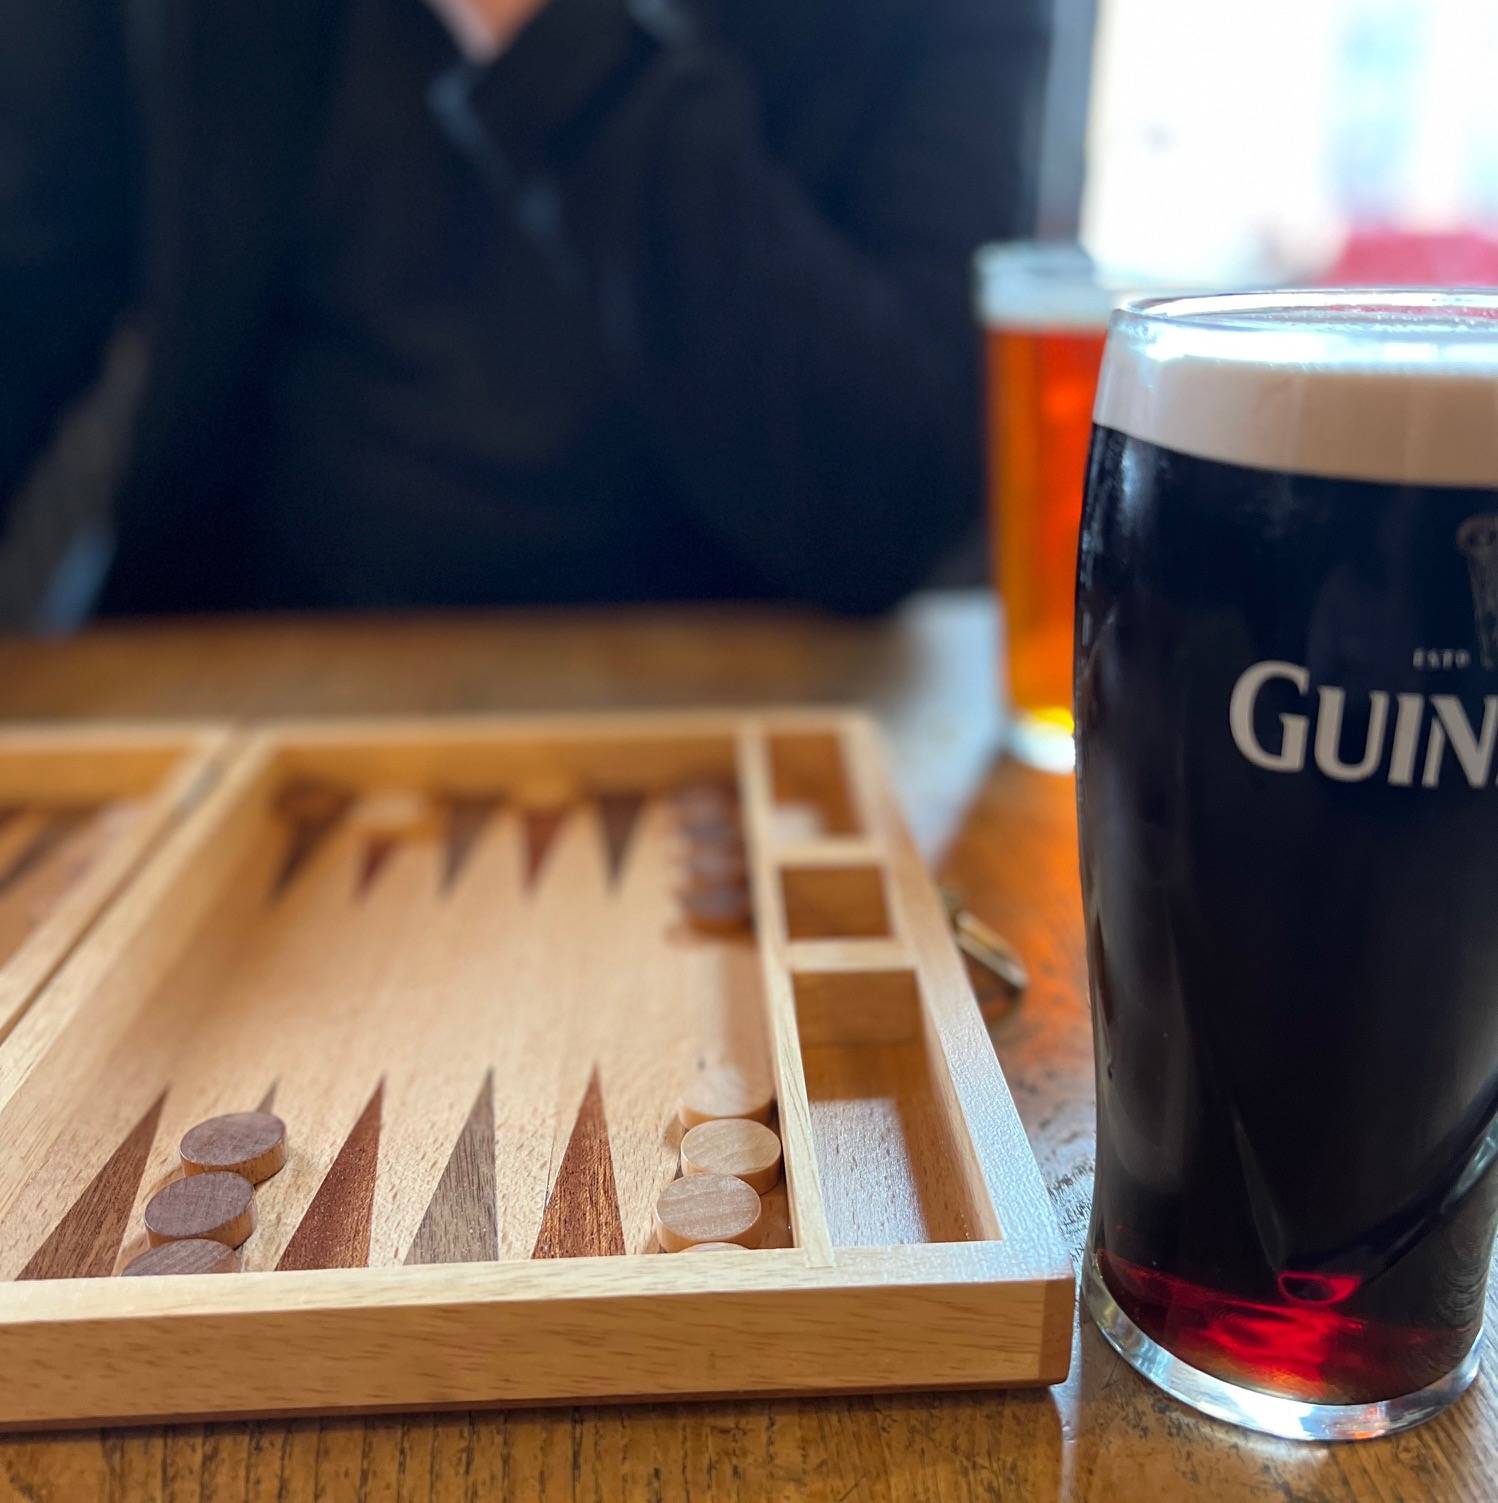 Pint of guinness next to wooden backgammon board in play